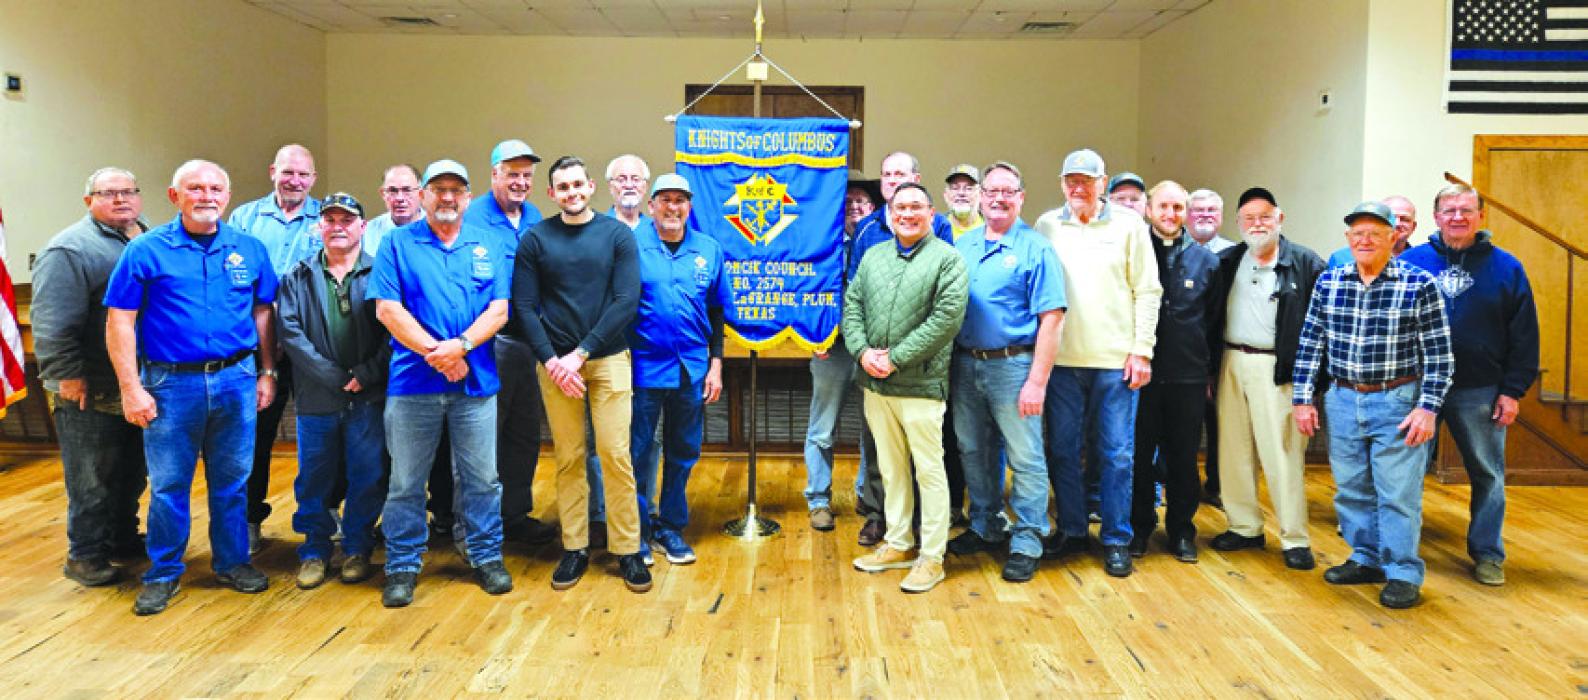 Knights of Columbus Donates to LHS